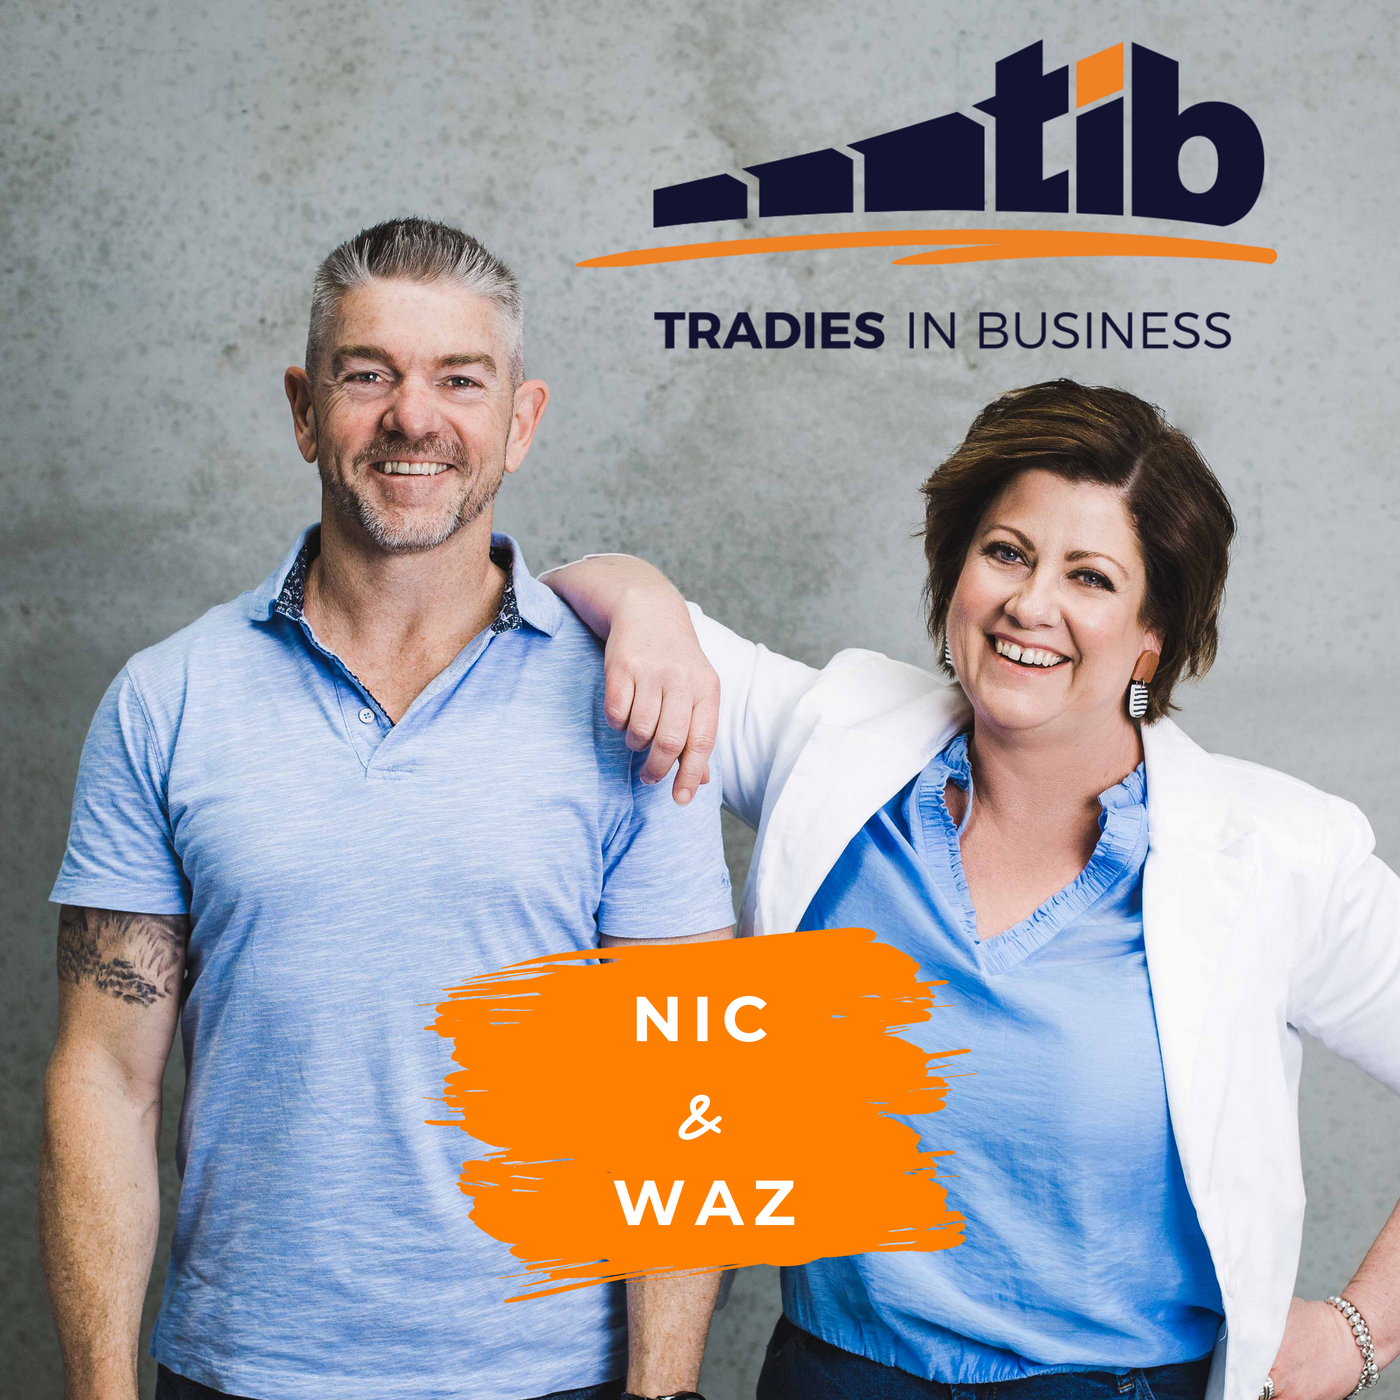 TIB185 Real Tradie Wives with Amii Jones from TouchWood Tree Services